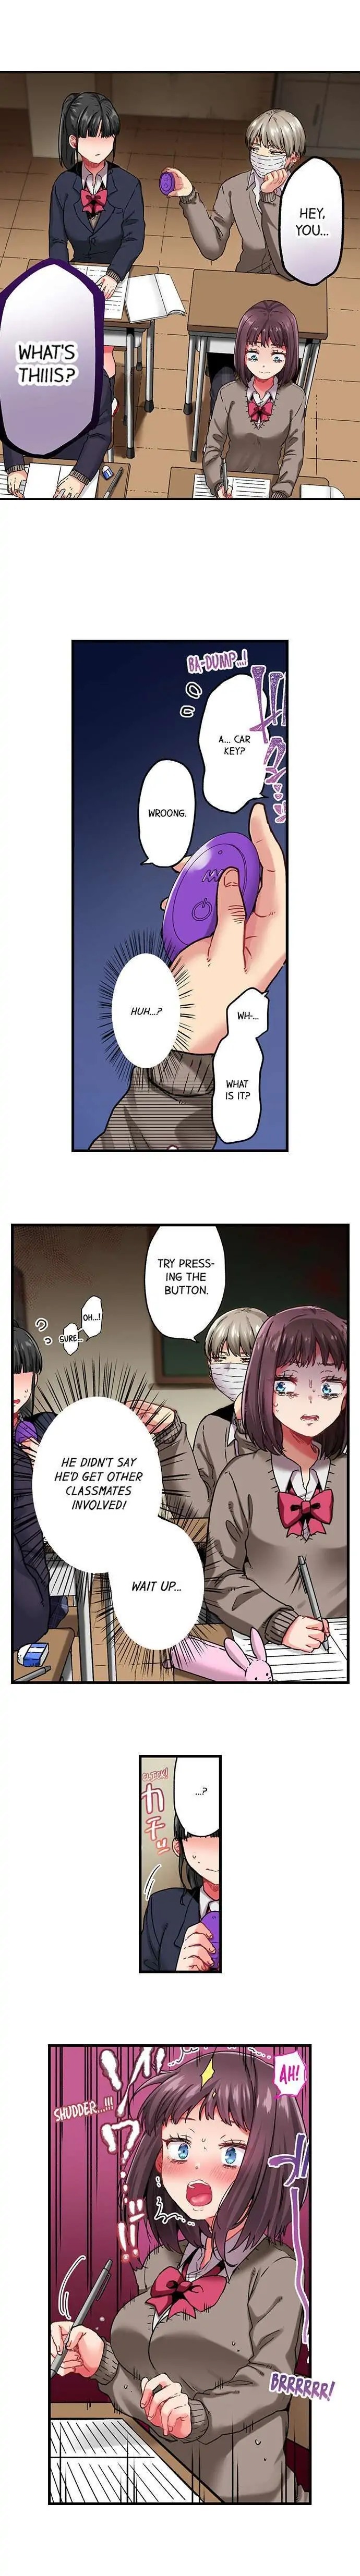 Cumming 100 Times To Protect My Crush - Chapter 19 Page 7